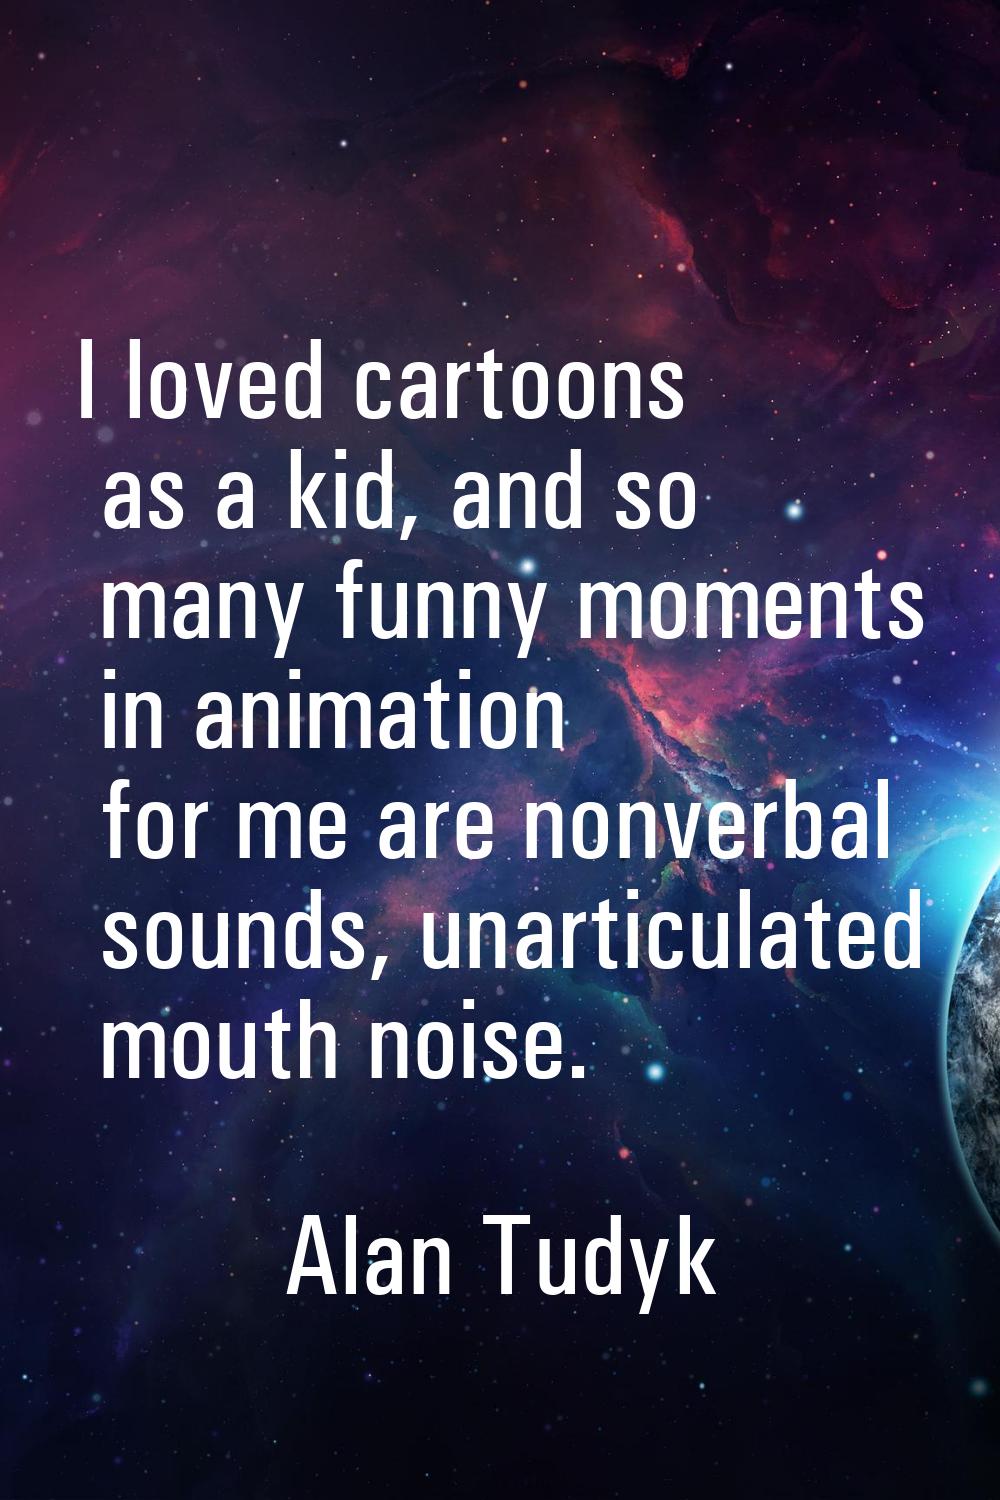 I loved cartoons as a kid, and so many funny moments in animation for me are nonverbal sounds, unar